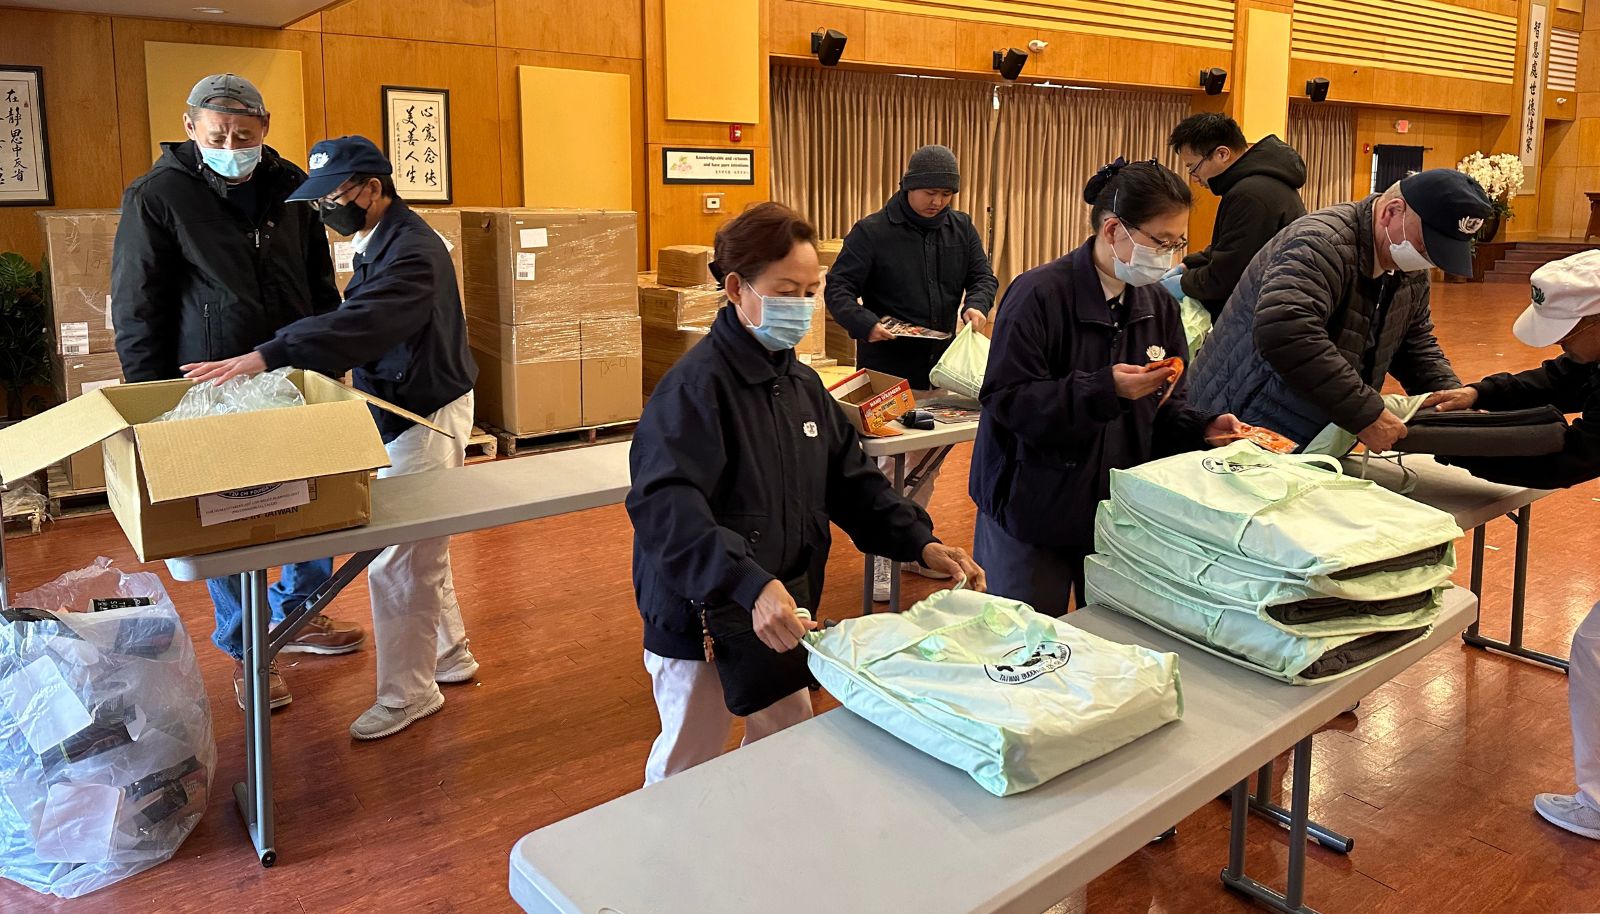 Tzu Chi volunteers pack and distribute blankets, socks and heating packs at the club.